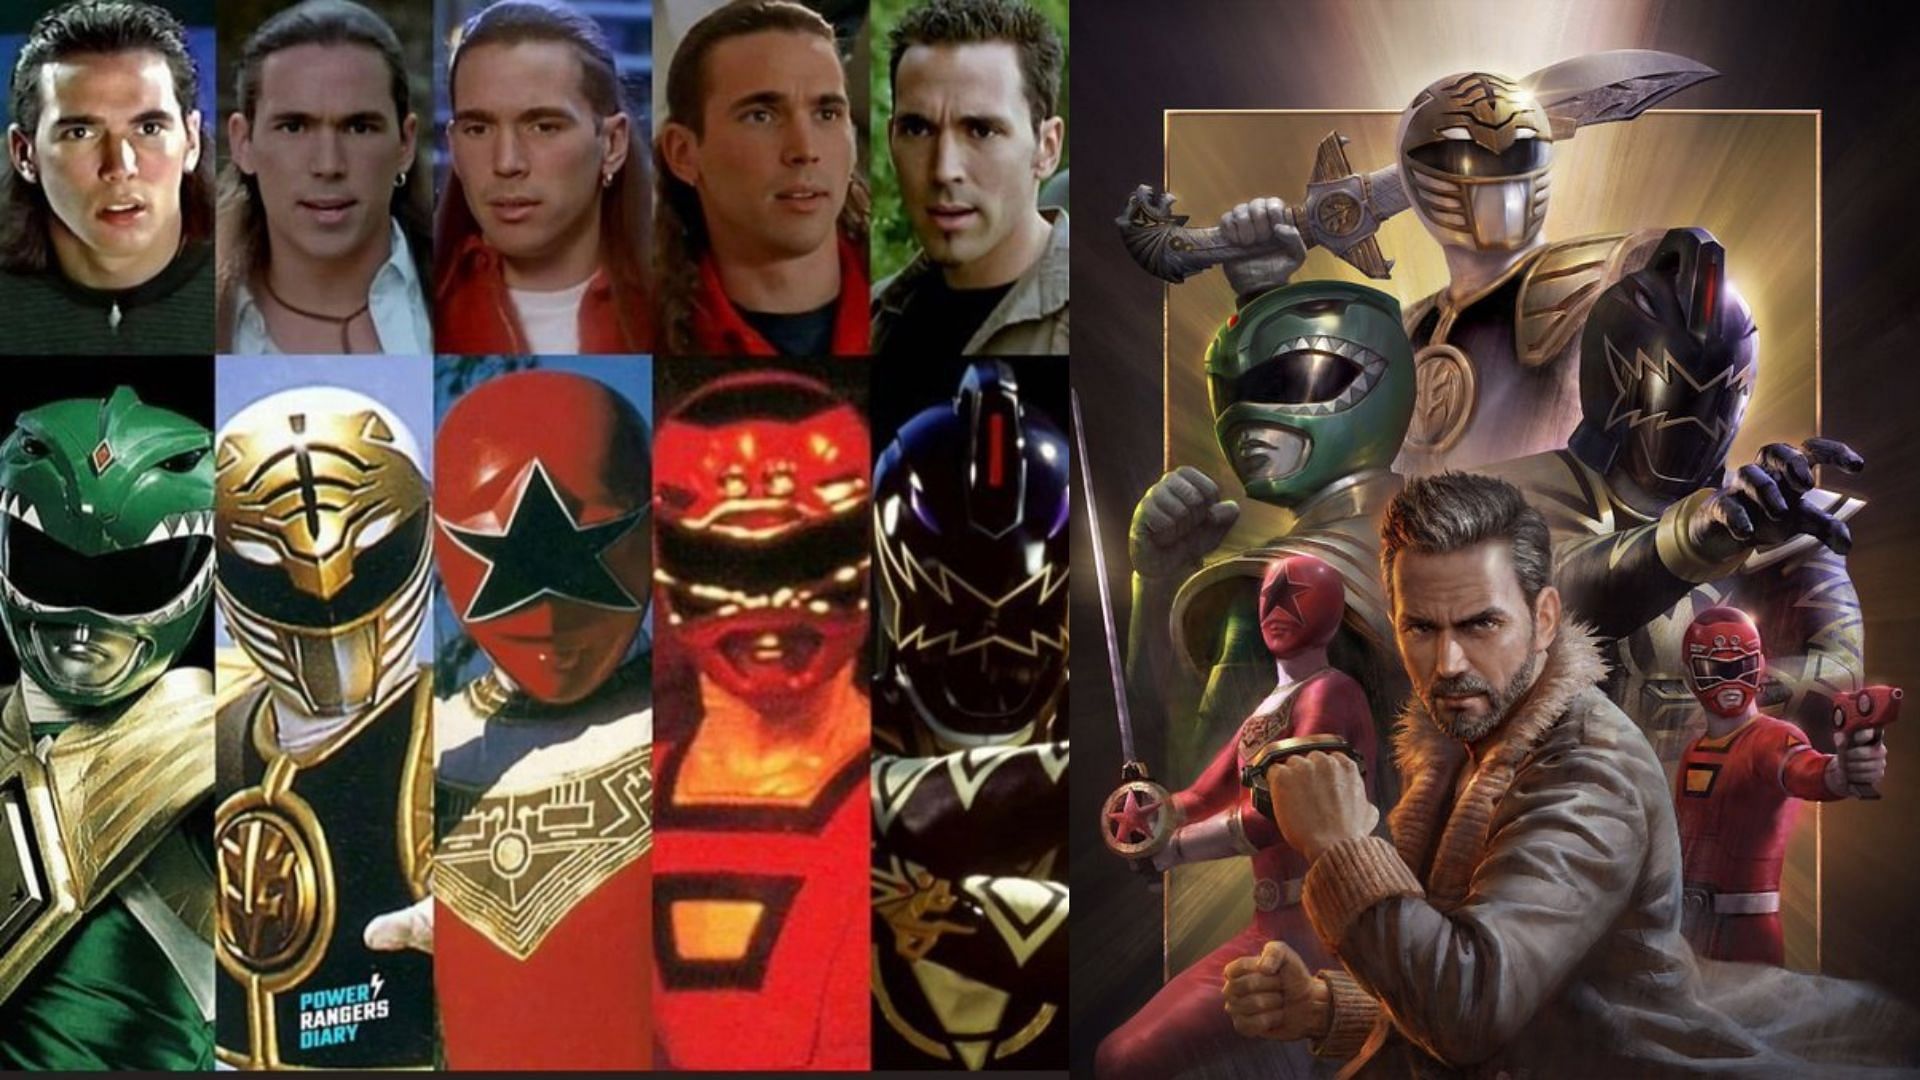 Frank played several roles in the Power Rangers franchise (image via Twitter/BritishViper)